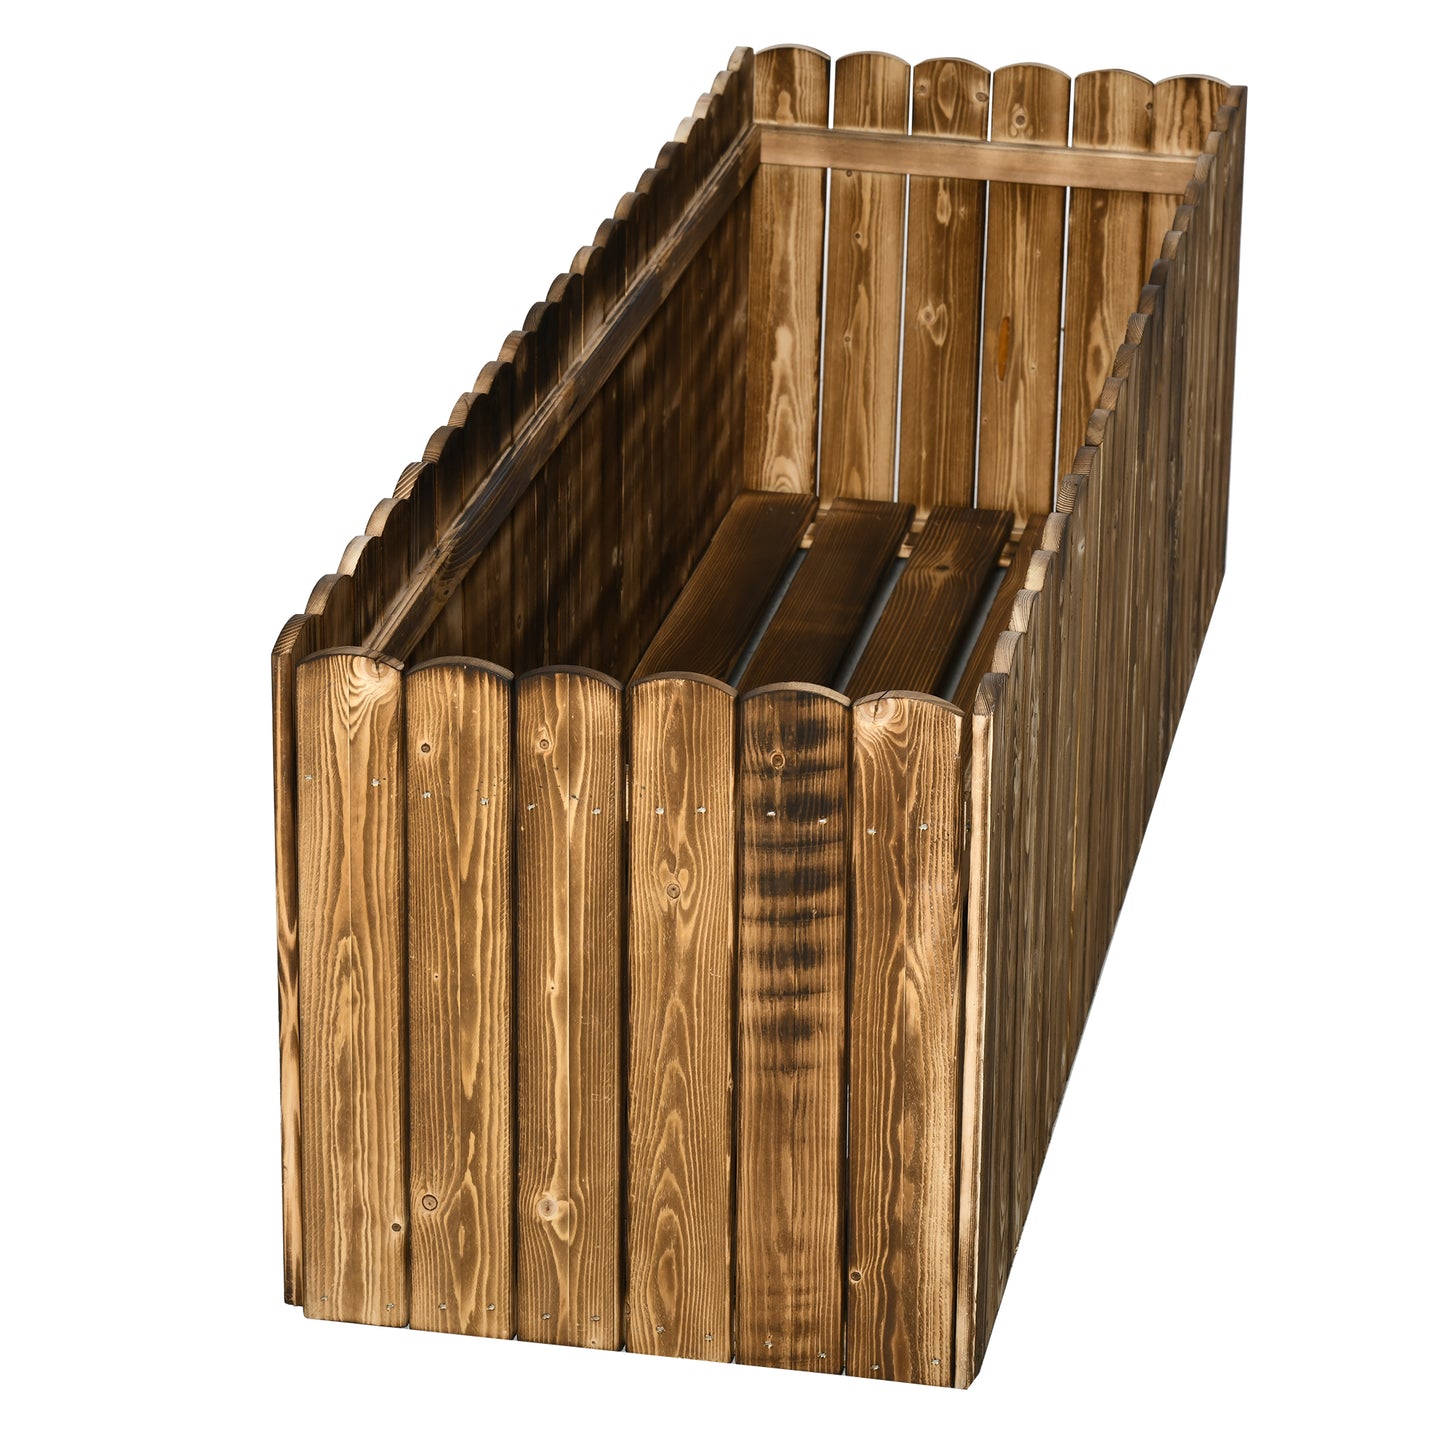 Outsunny 172L Garden Flower Raised Bed Pot Wooden Outdoor Large Rectangle Planter Vegetable Box Outdoor Herb Holder Display (120L x 40W x 40H (cm))